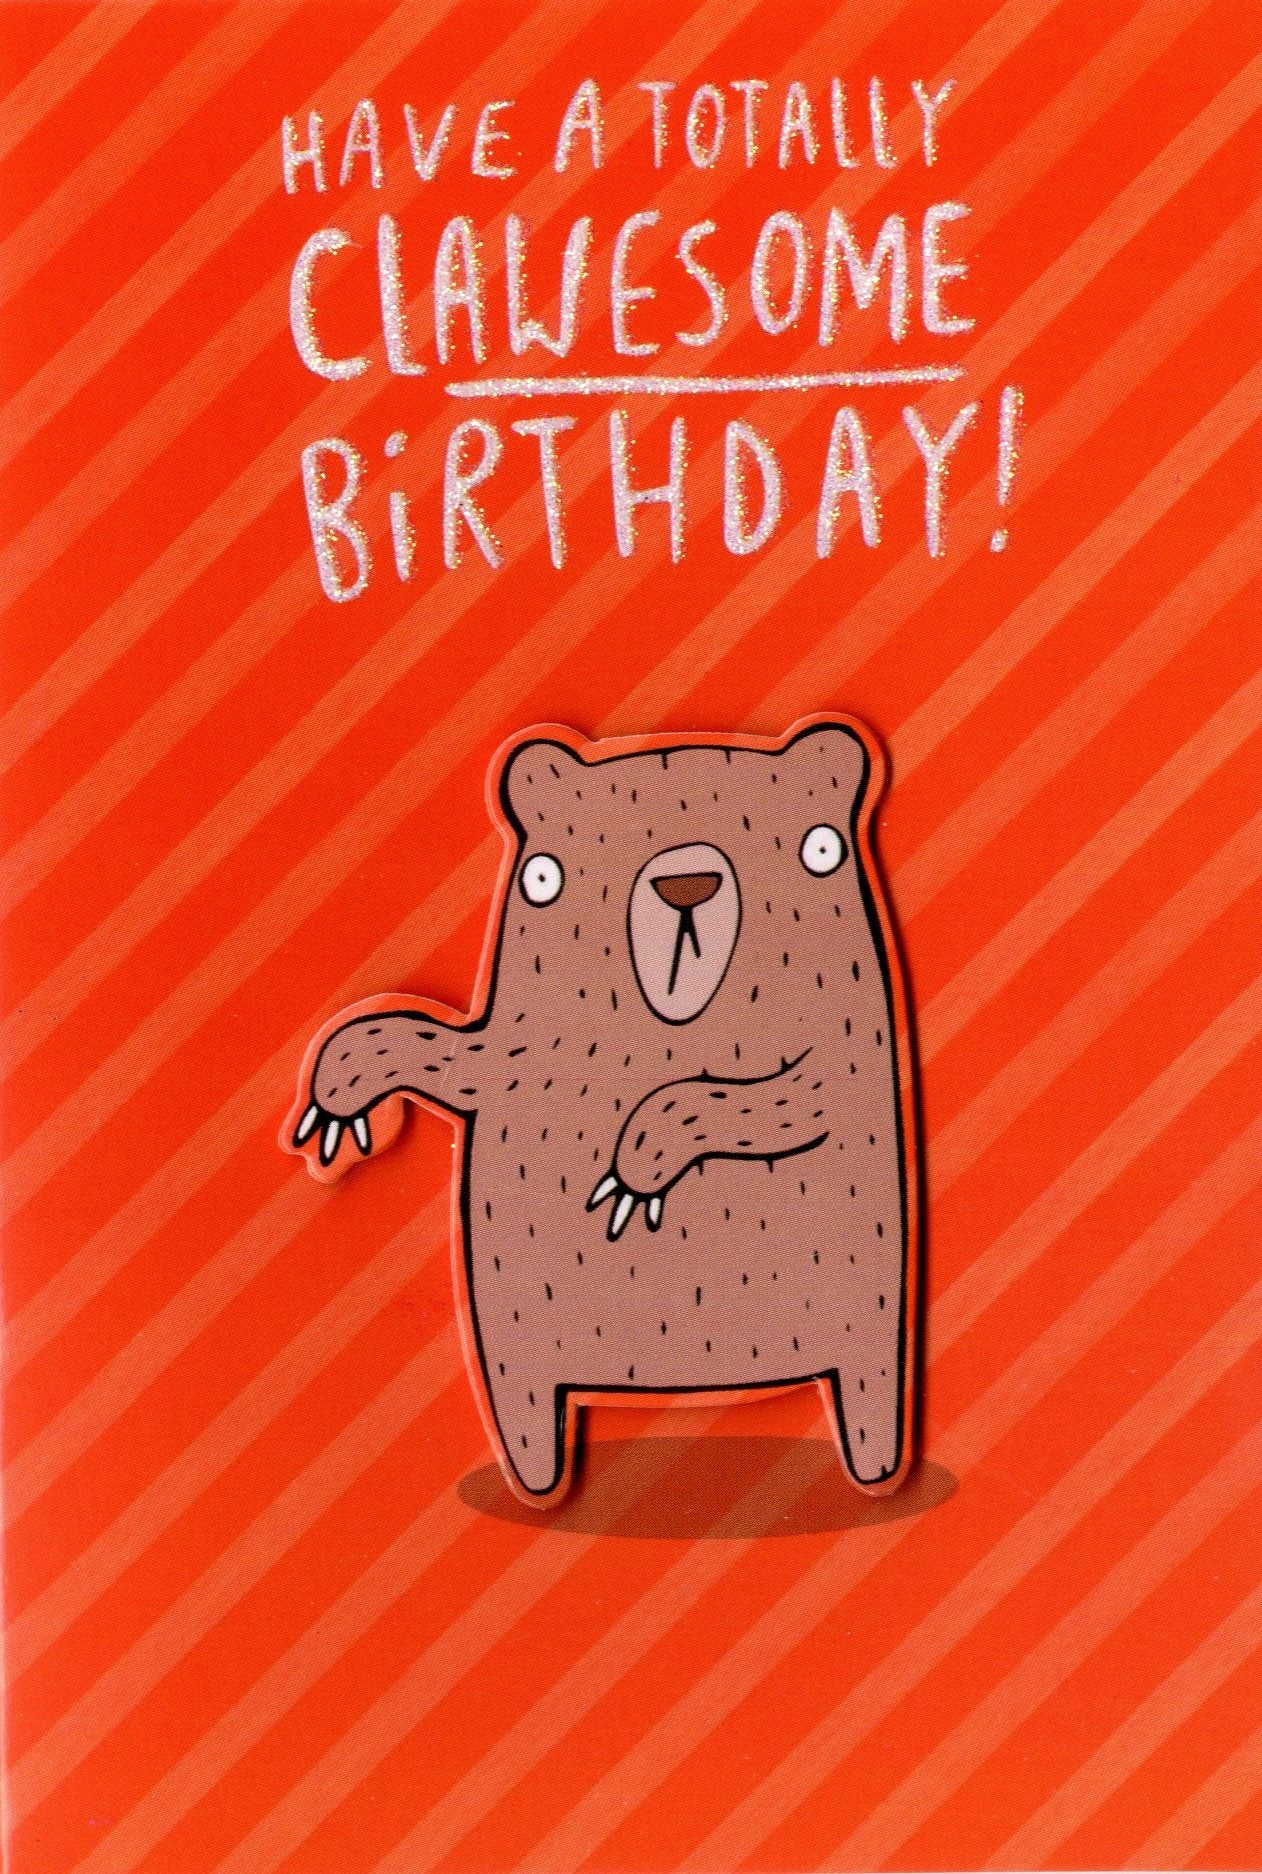 Have A Totally Clawesome Birthday Greeting Card